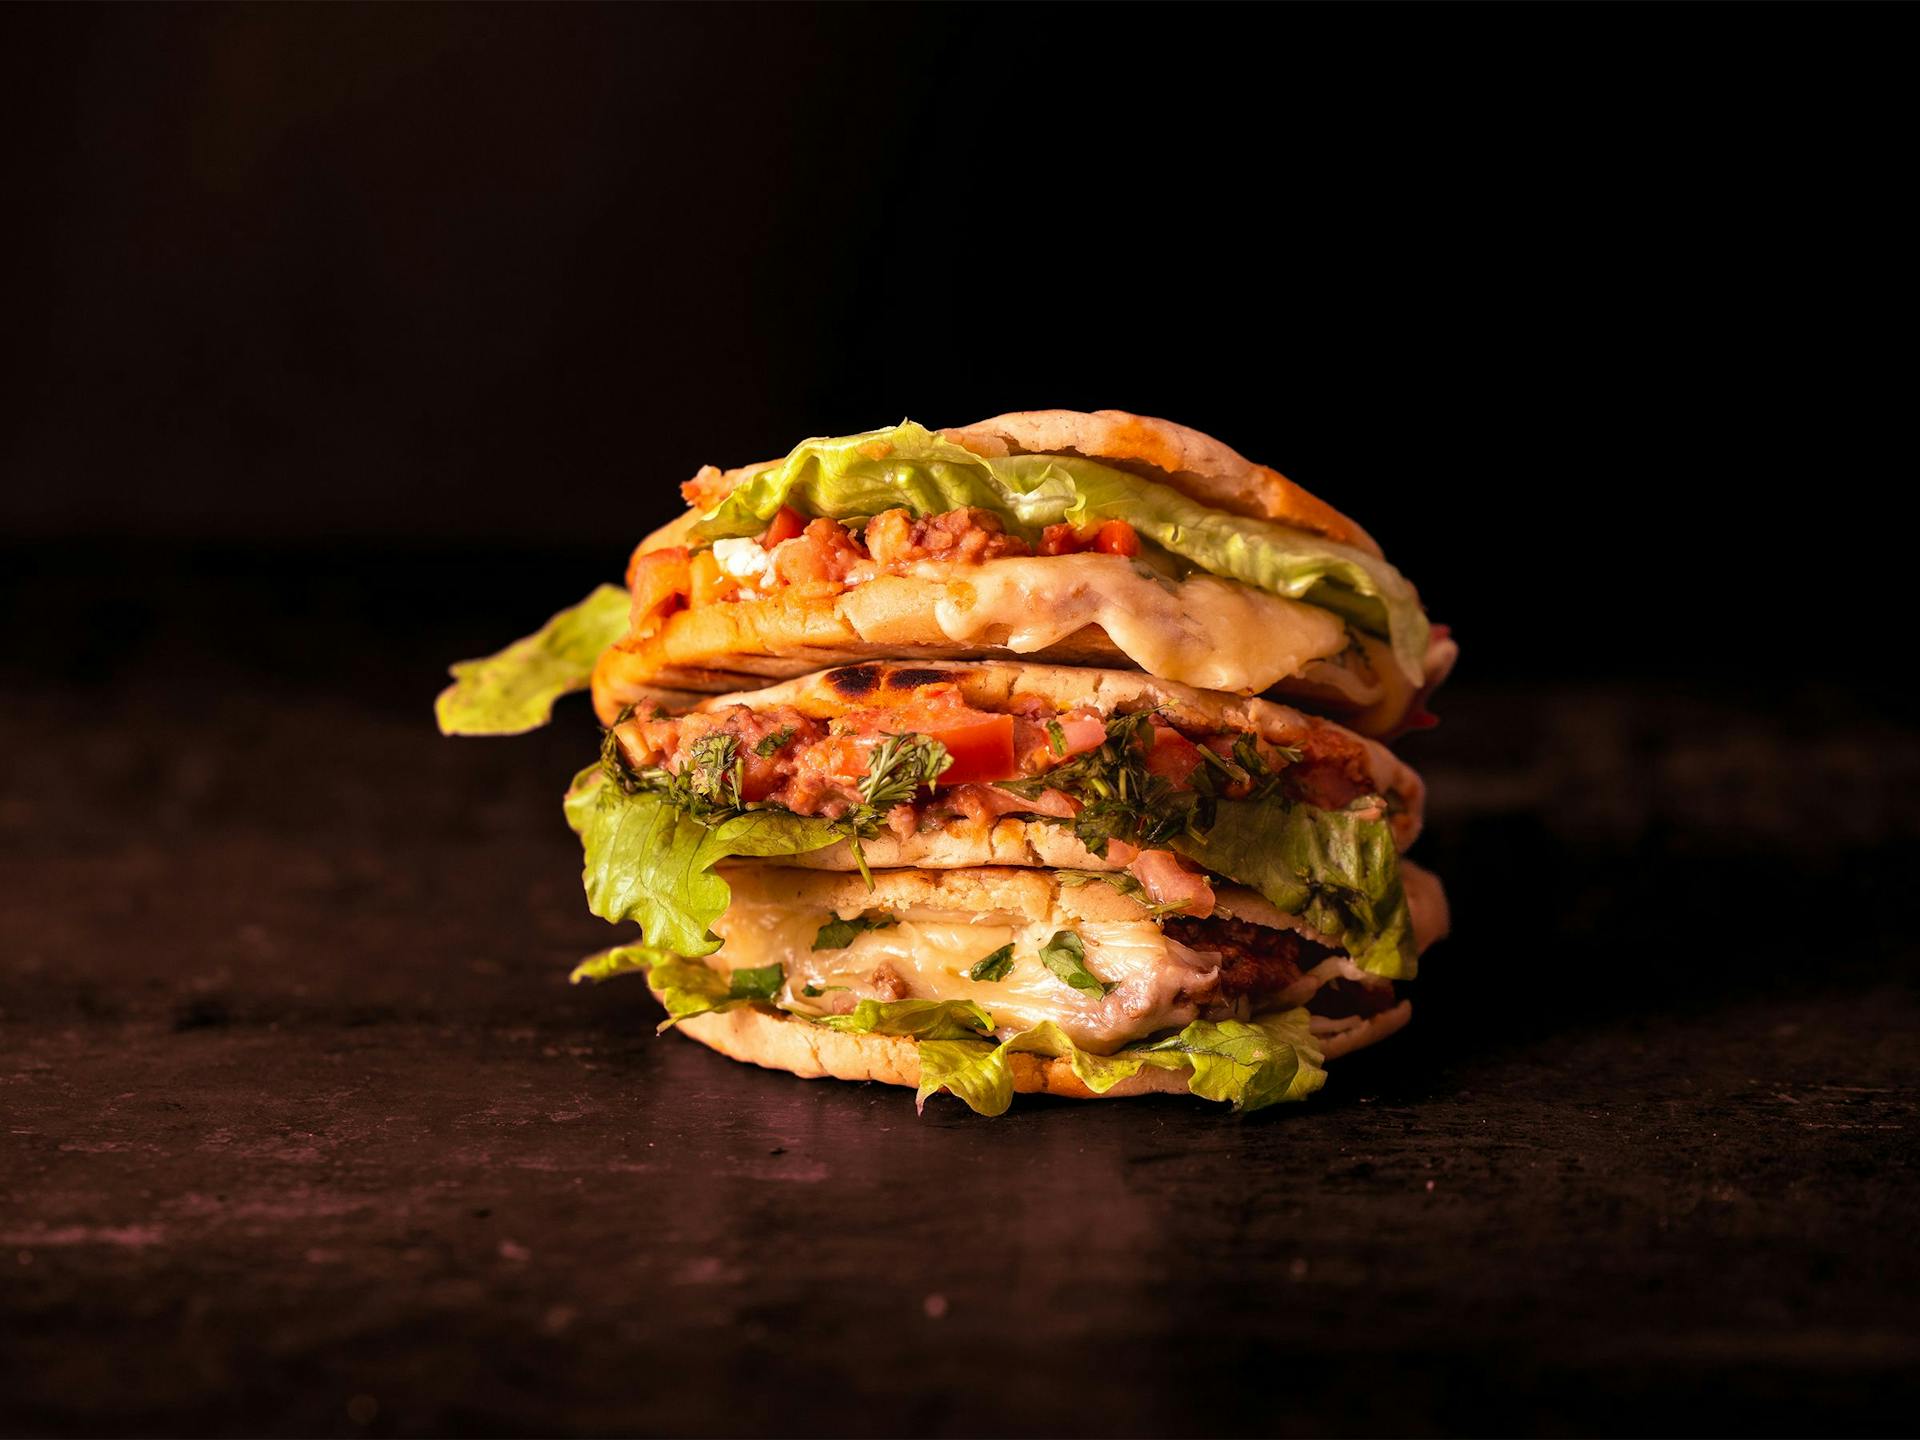 Three arepas stacked on top of each other in front of a black background